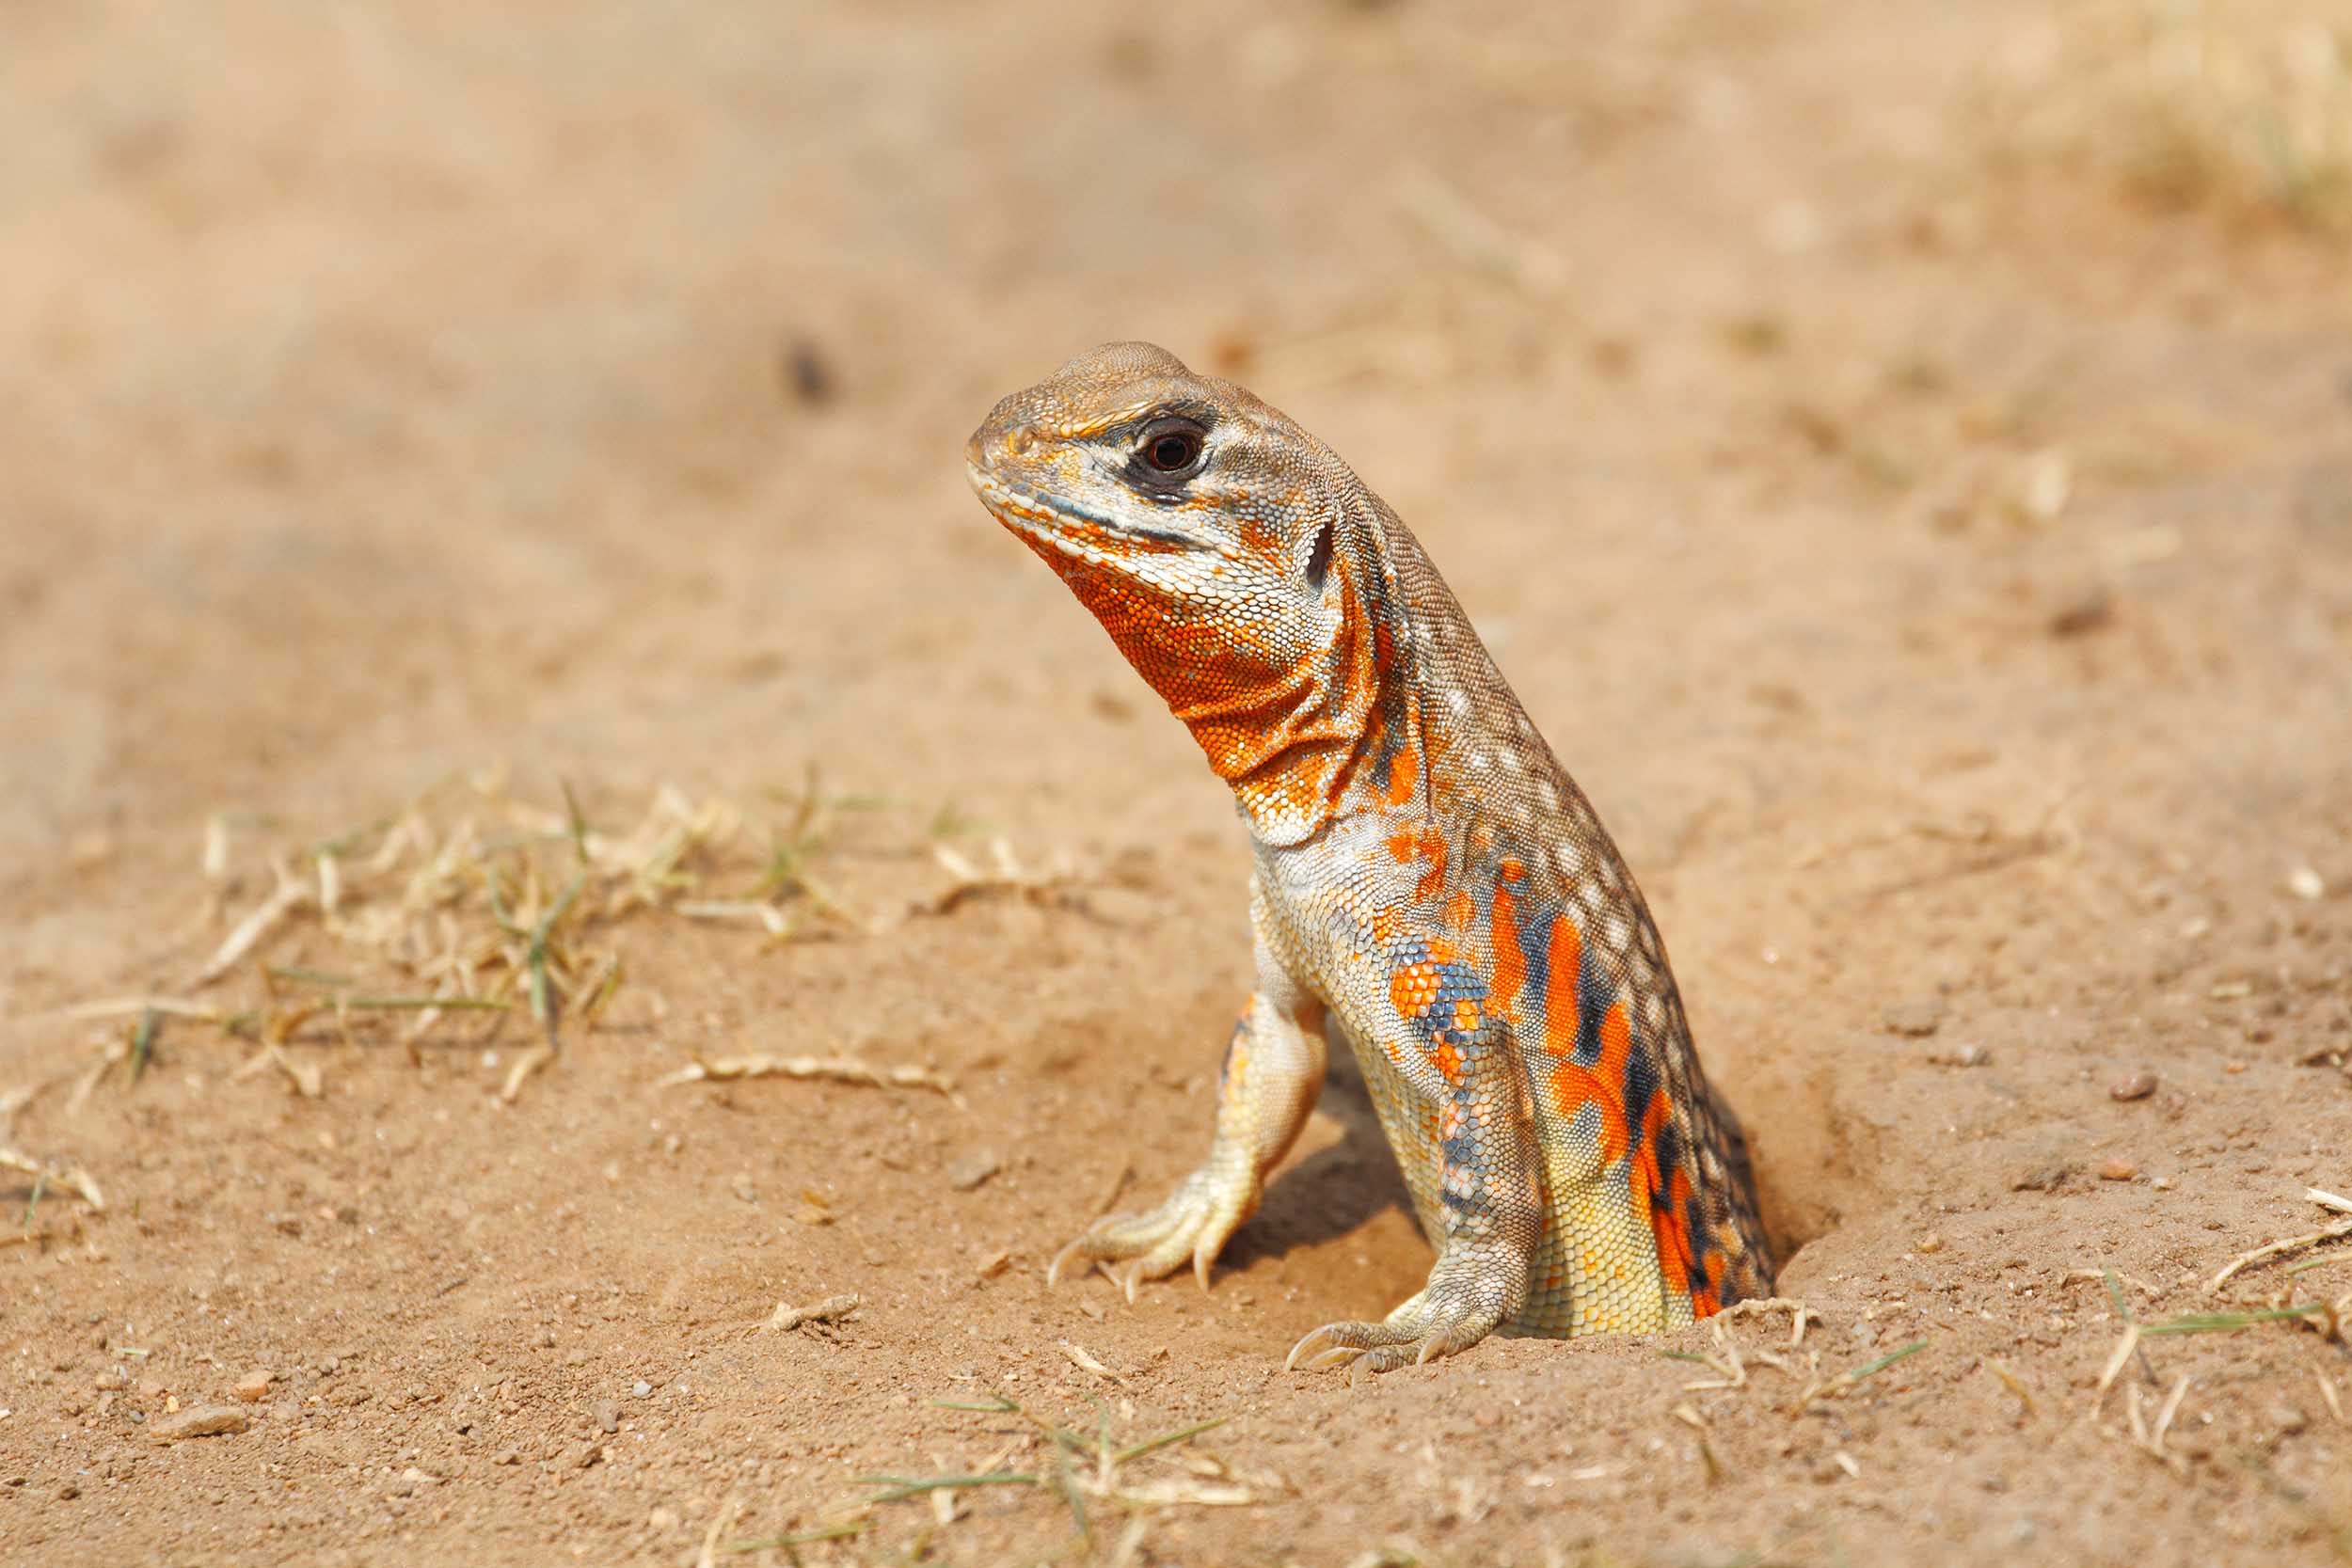 Butterfly Agama, Leiolepis belliana ocellata emerges from its burrow